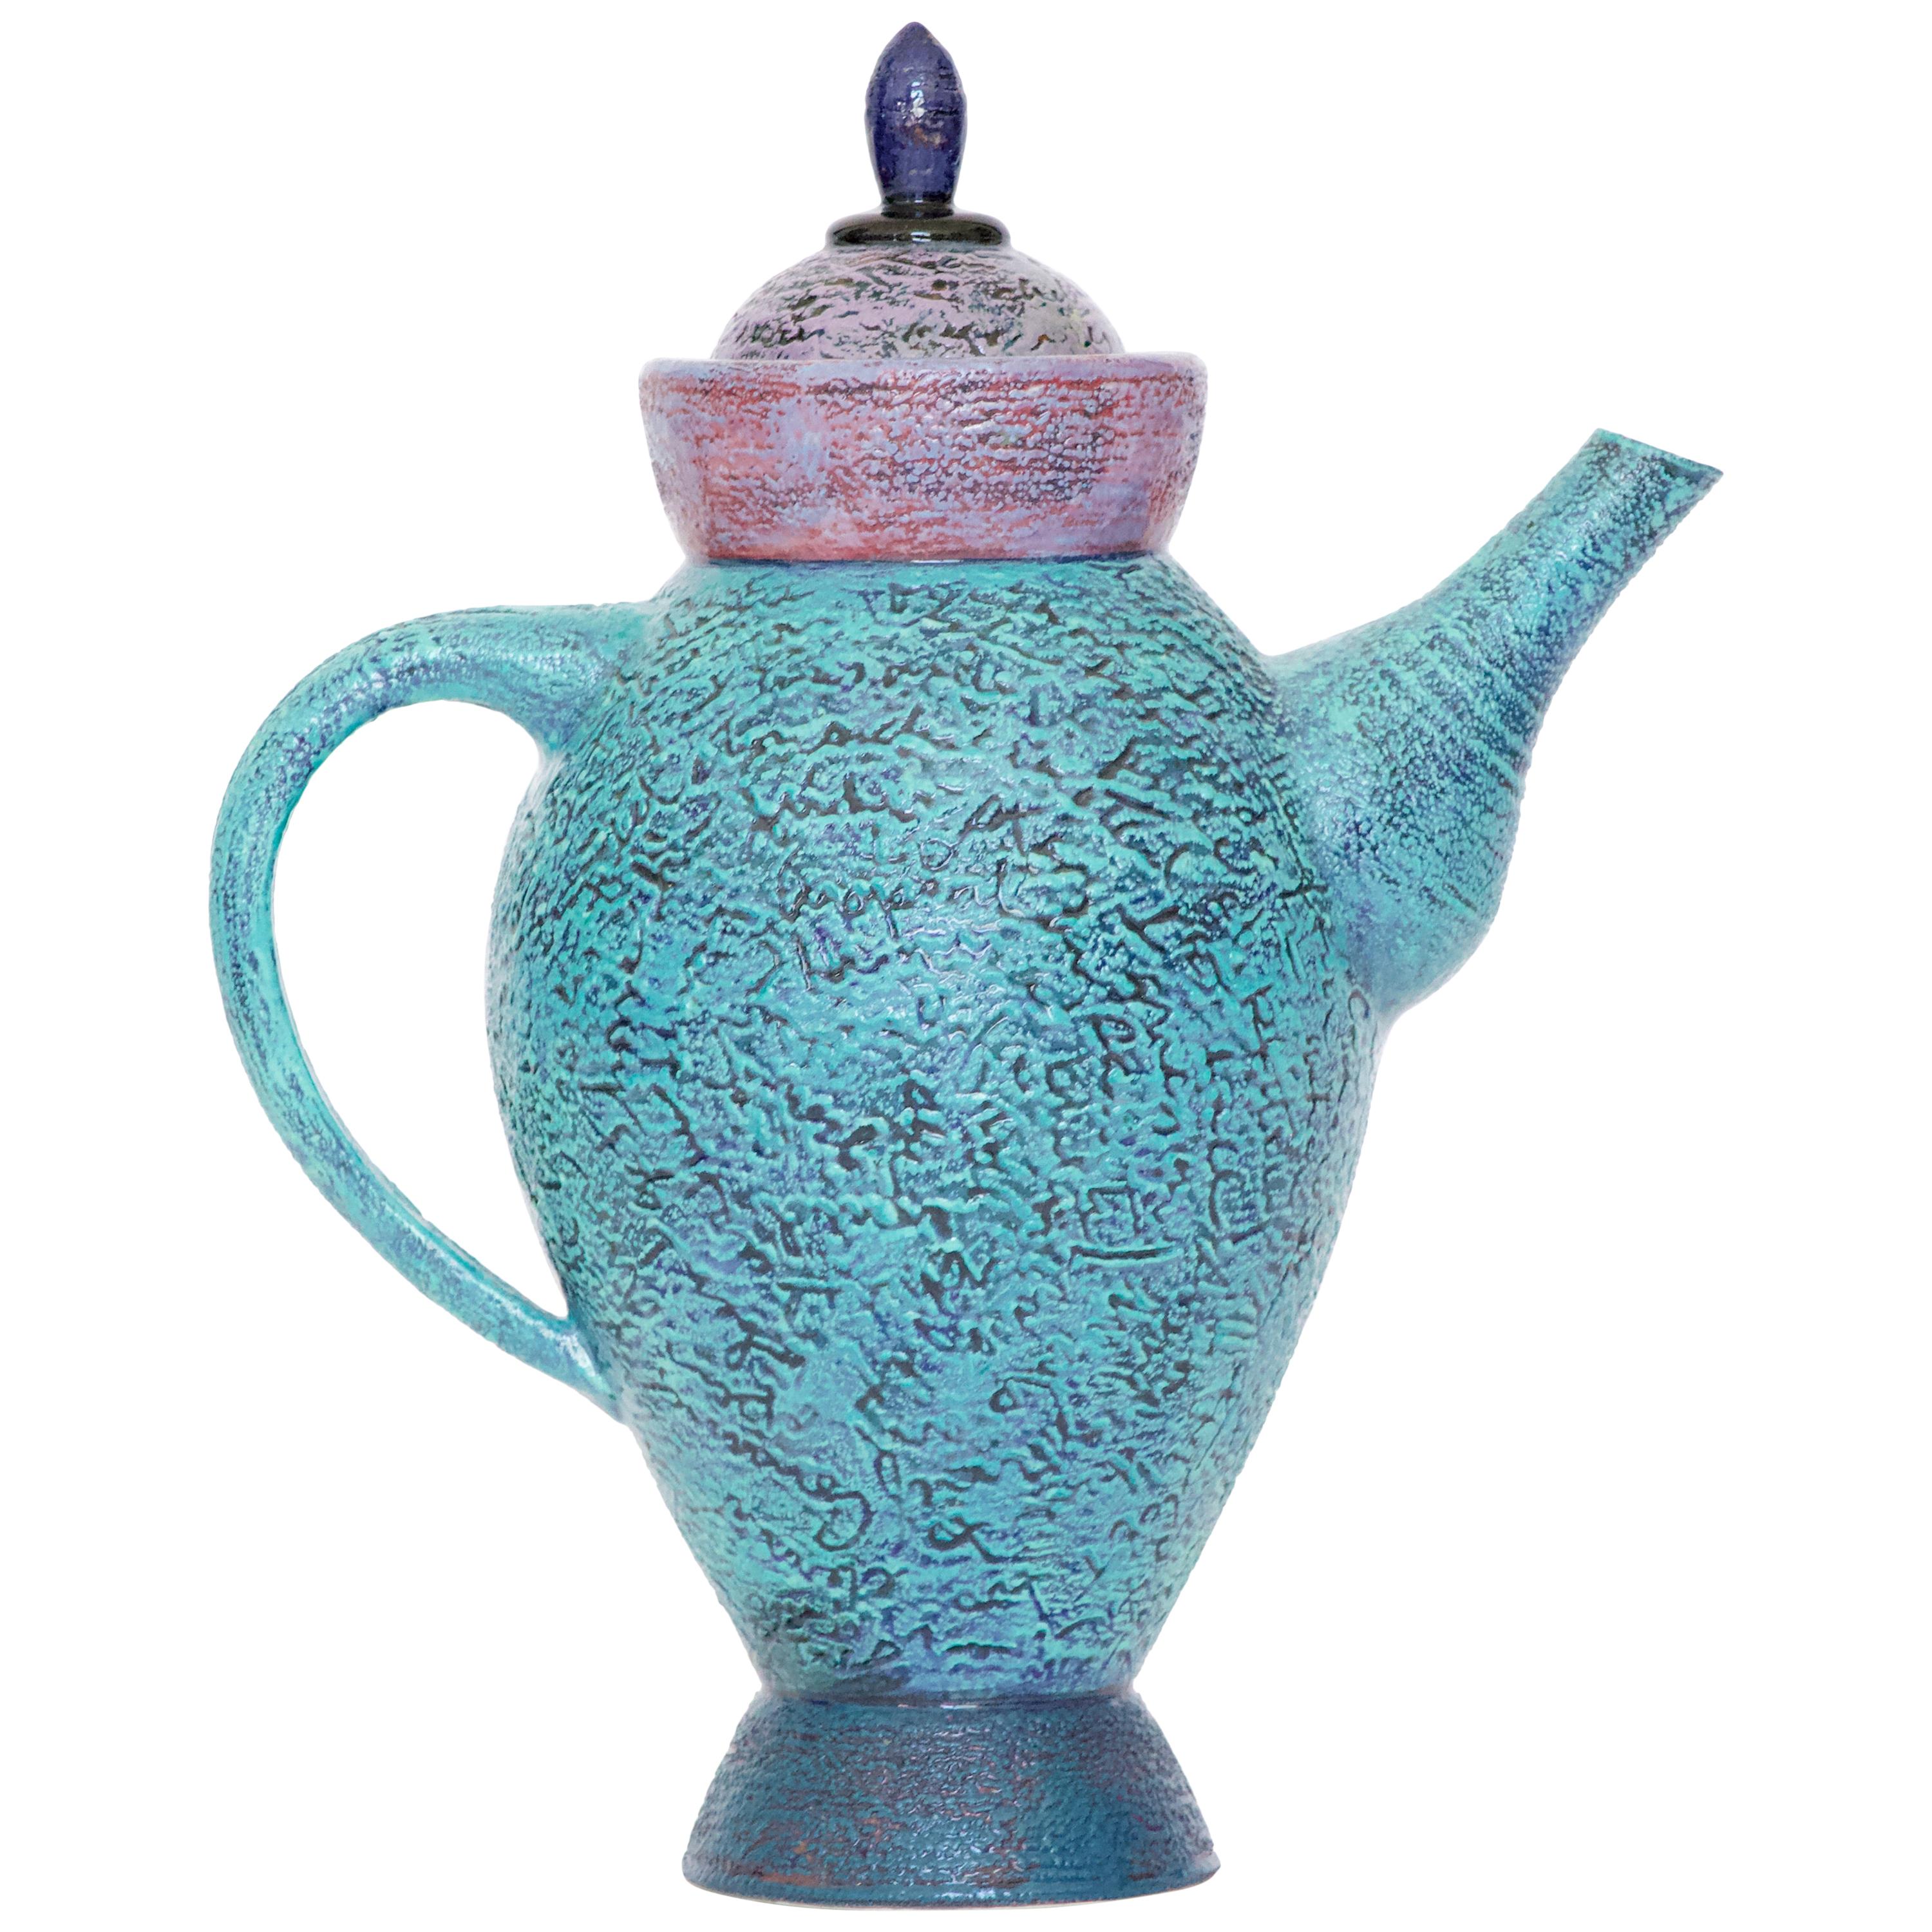 Decorative Ceramic Teapot by Studio Artist Michel Conroy Number 2 of 14 For Sale